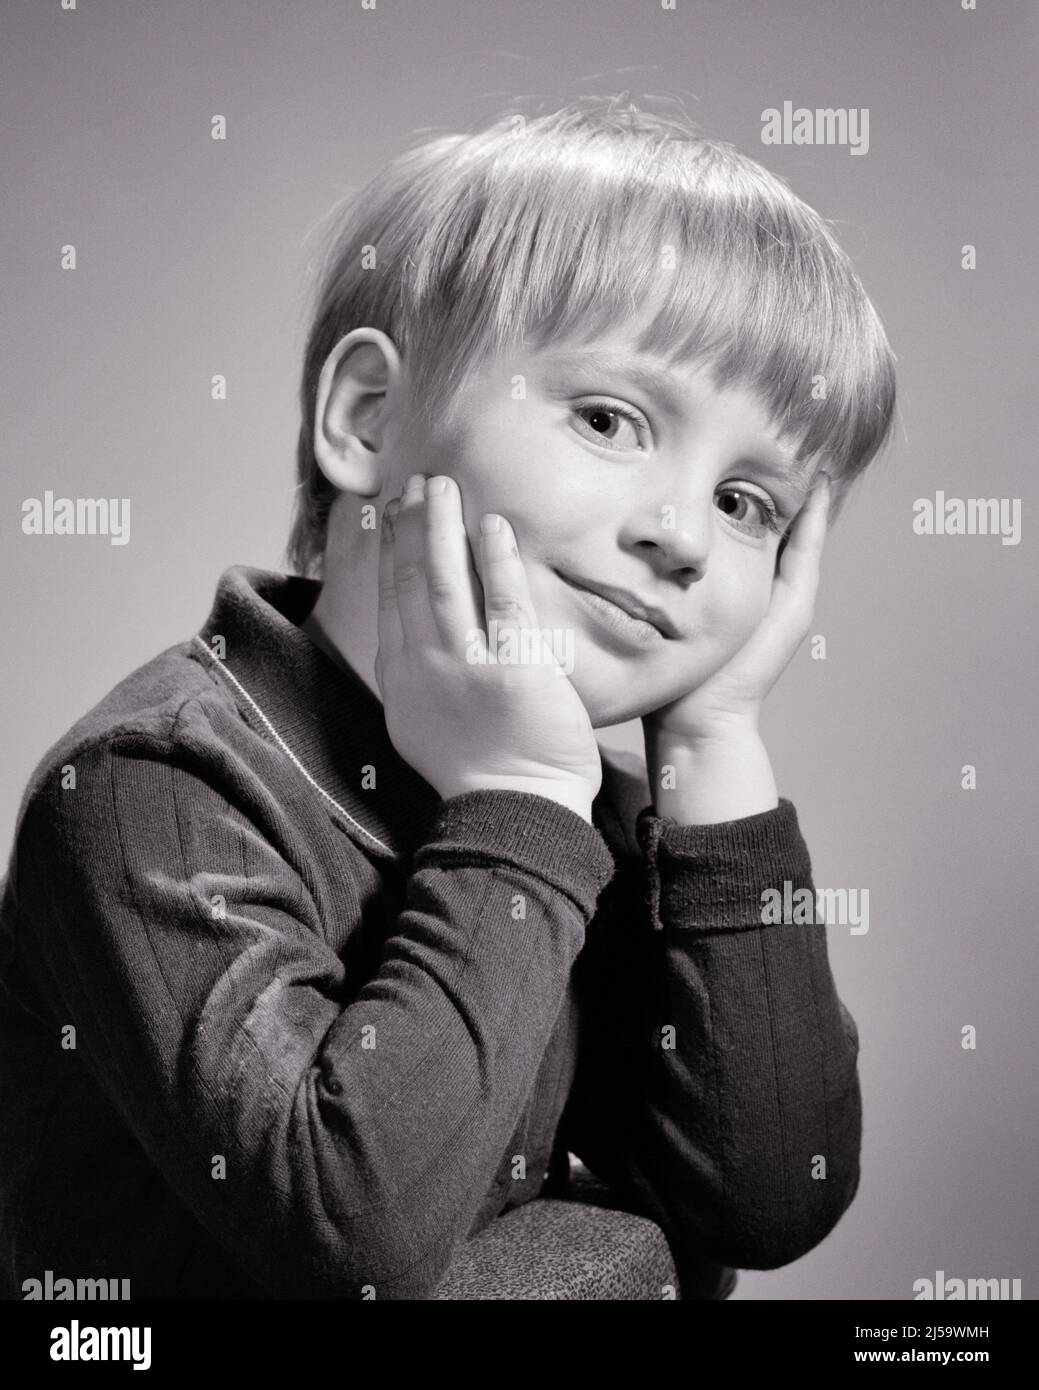 1960s CUTE LITTLE BLONDE BOY HOLDING HIS HEAD IN HIS HANDS LOOKING AT CAMERA - j12330 HAR001 HARS HALF-LENGTH INSPIRATION MALES CONFIDENCE EXPRESSIONS B&W EYE CONTACT DREAMS HAPPINESS CHEERFUL DISCOVERY HIS INTELLIGENT KNOWLEDGE PRIDE MISCHIEVOUS SMILES CONCEPTUAL IMP CURIOUS IMAGINATION JOYFUL STYLISH DEVILISH PLEASANT AGREEABLE CHARMING COOPERATION CREATIVITY GROWTH JUVENILES LOVABLE PERSONABLE PLEASING TOGETHERNESS ADORABLE APPEALING BLACK AND WHITE CAUCASIAN ETHNICITY HAR001 OLD FASHIONED Stock Photo